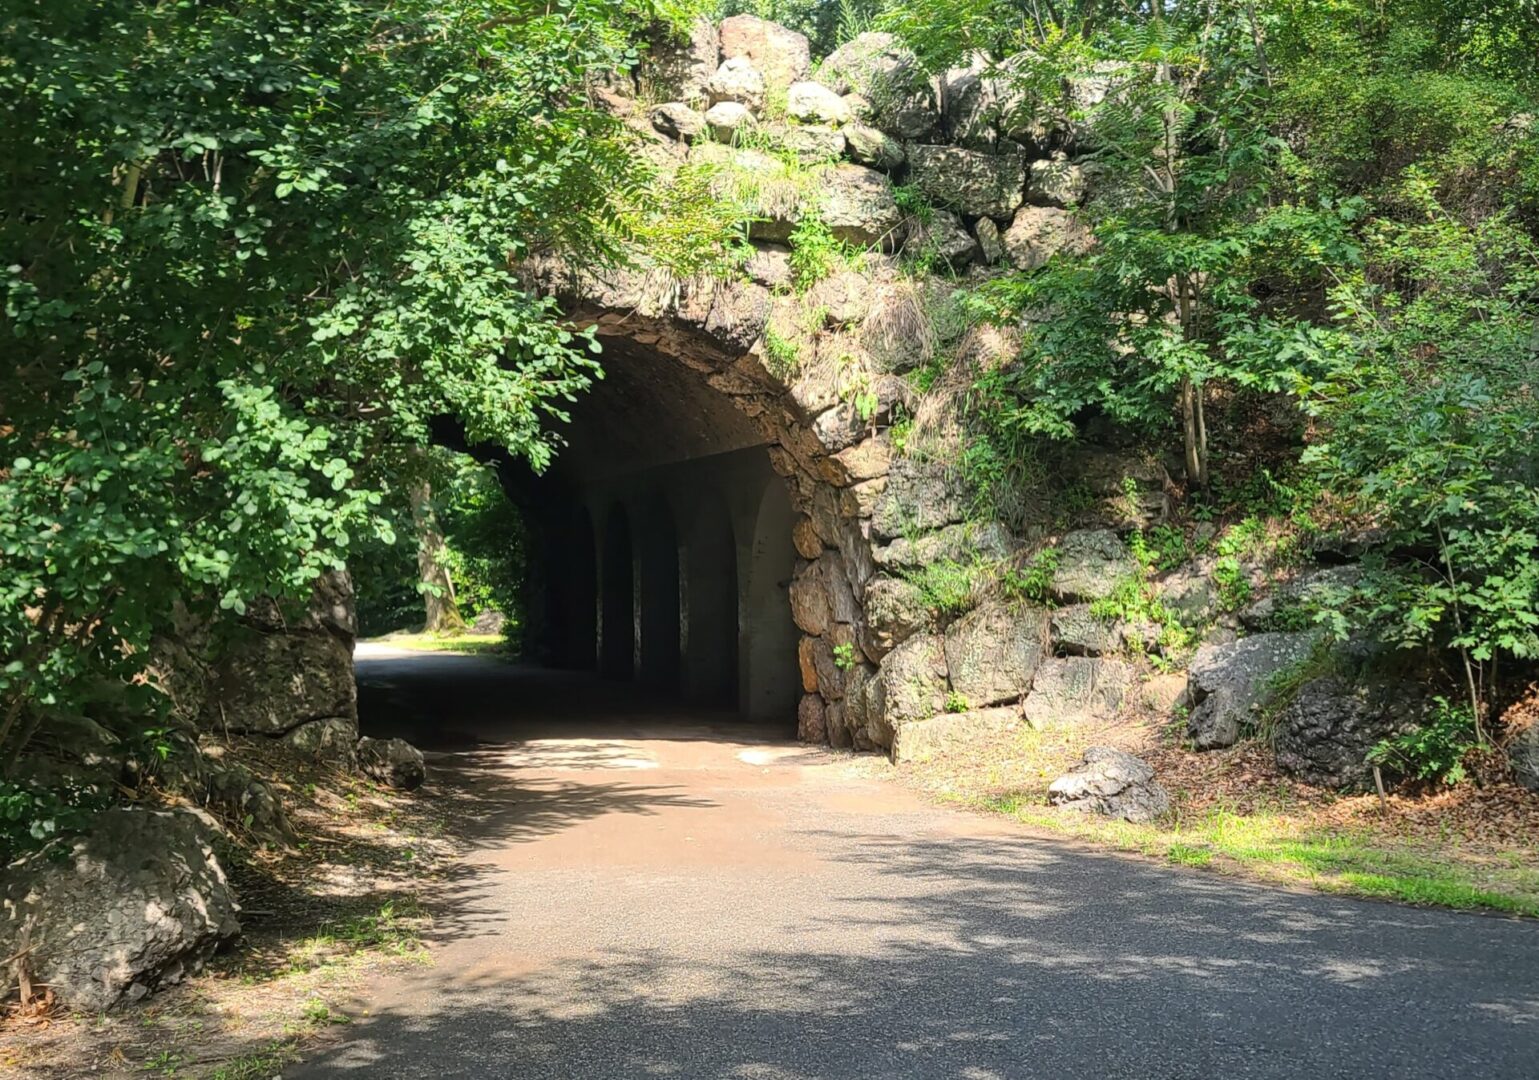 A tunnel with trees and rocks on the side of it.